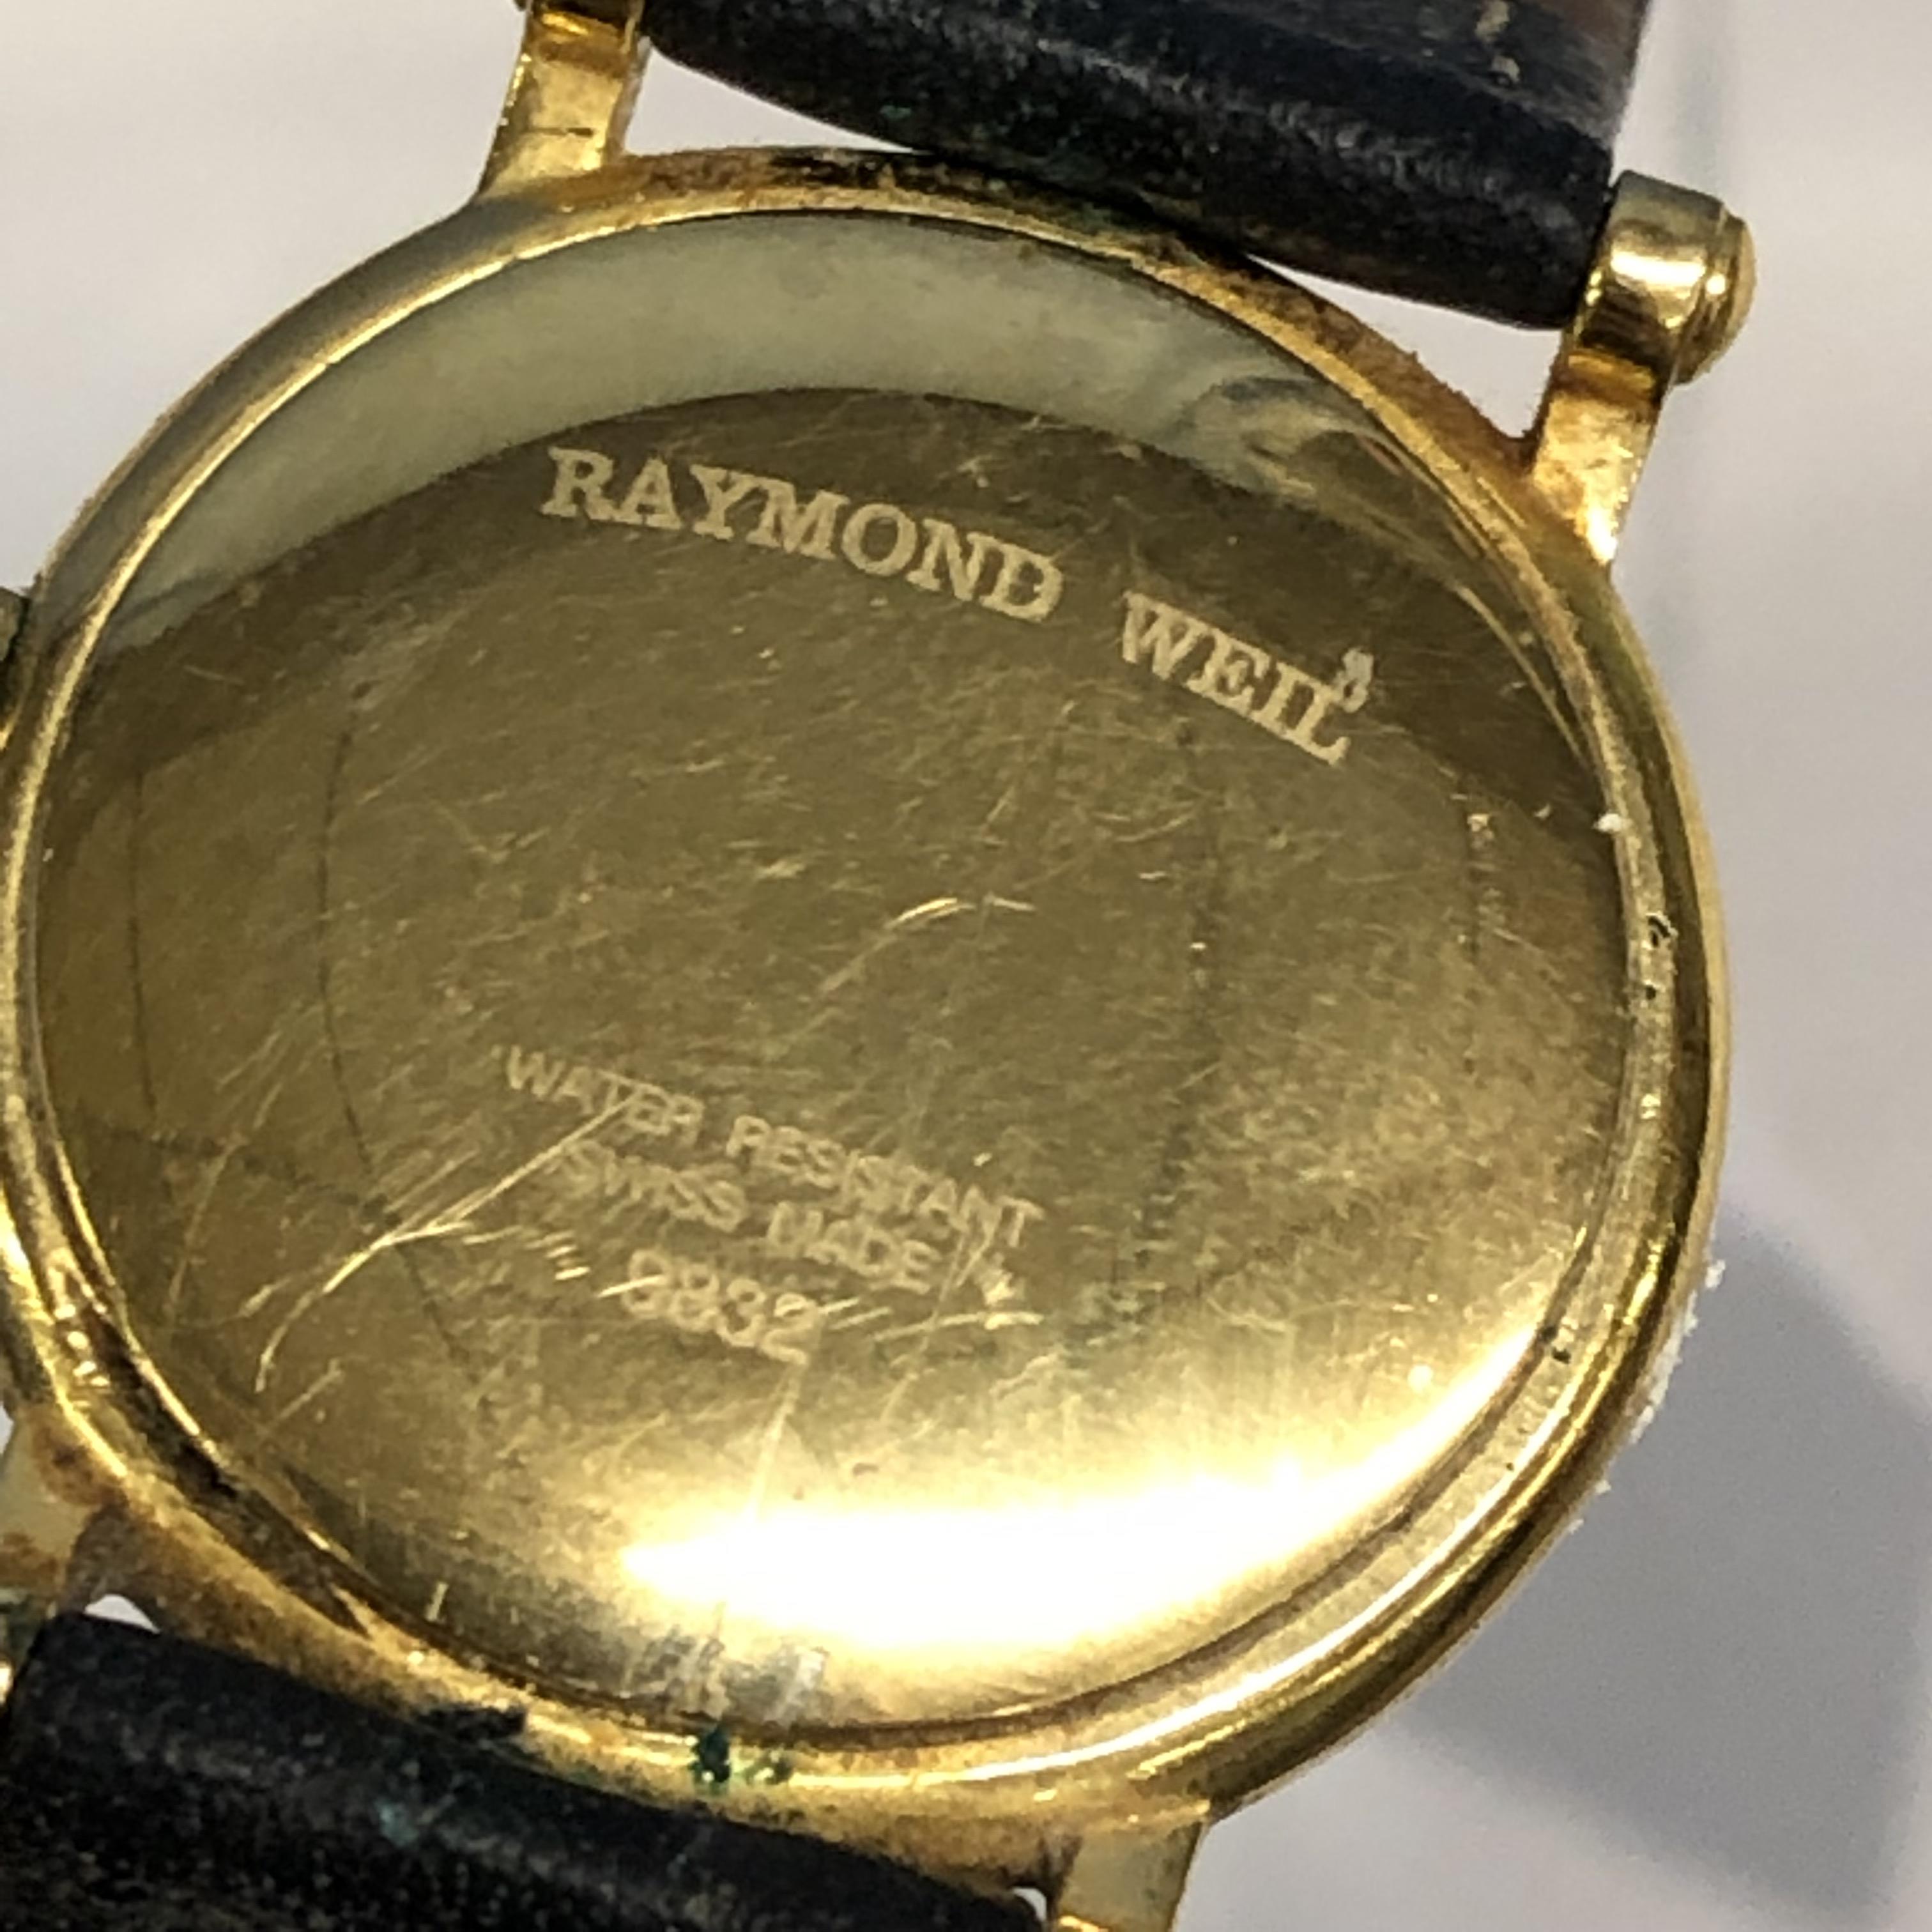 RAYMOND WEIL LADIES WRIST WATCH ON LEATHER STRAP - Image 3 of 4